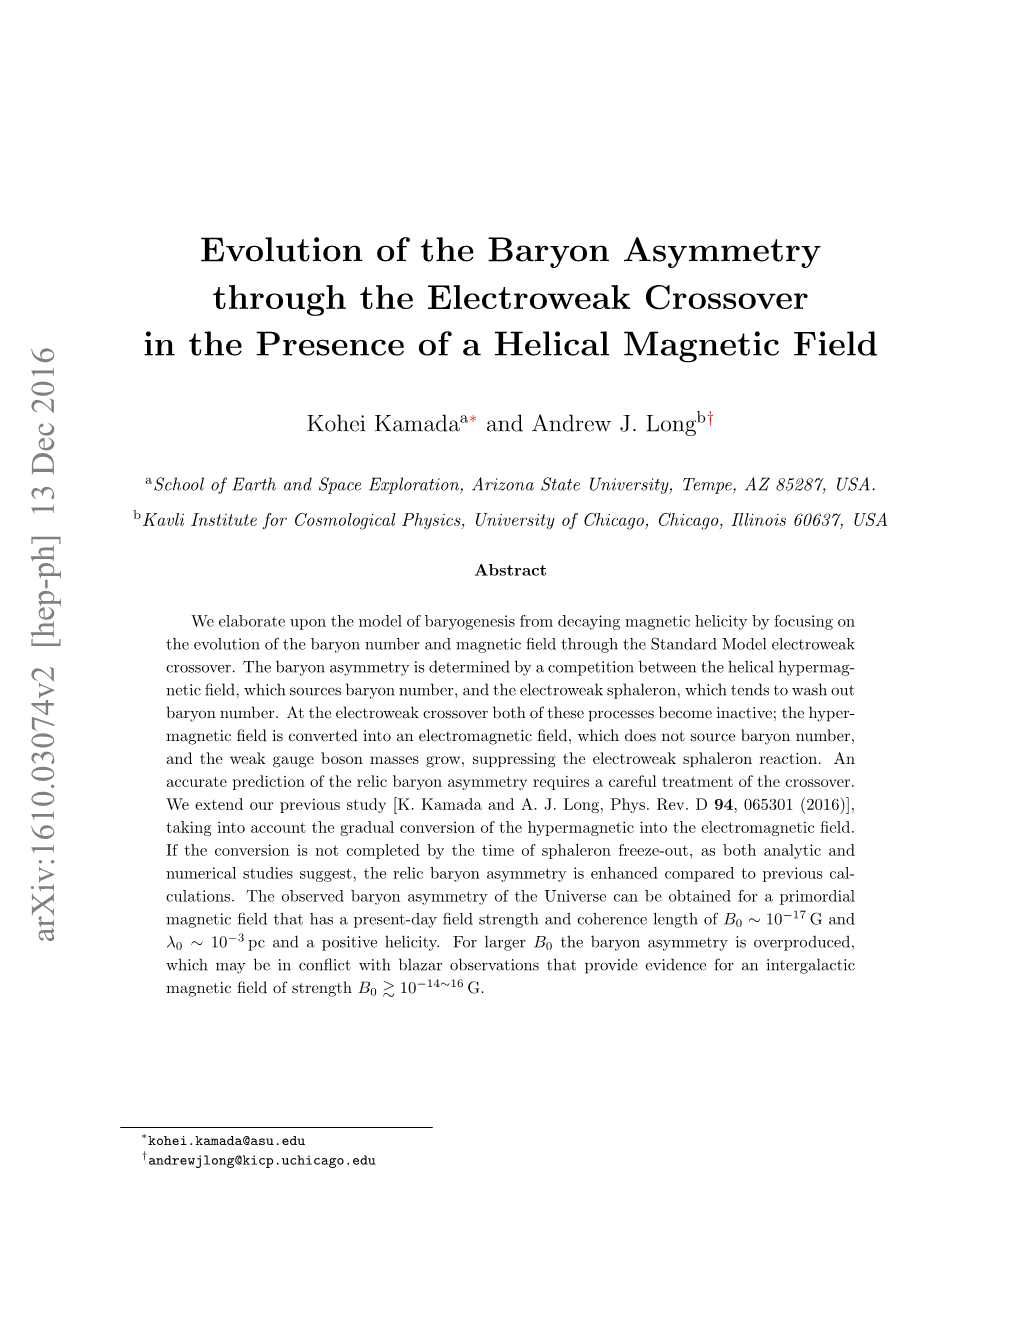 Evolution of the Baryon Asymmetry Through the Electroweak Crossover in the Presence of a Helical Magnetic Field Arxiv:1610.03074